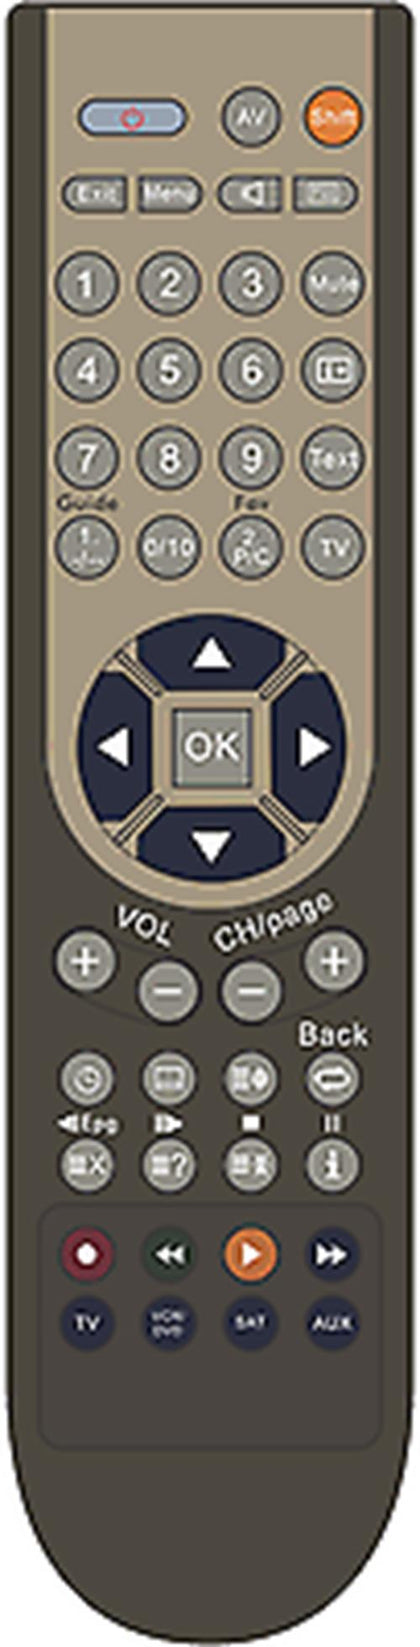 Replacement Remote Control for ICan 3900S / i-can 3900 / 4000S